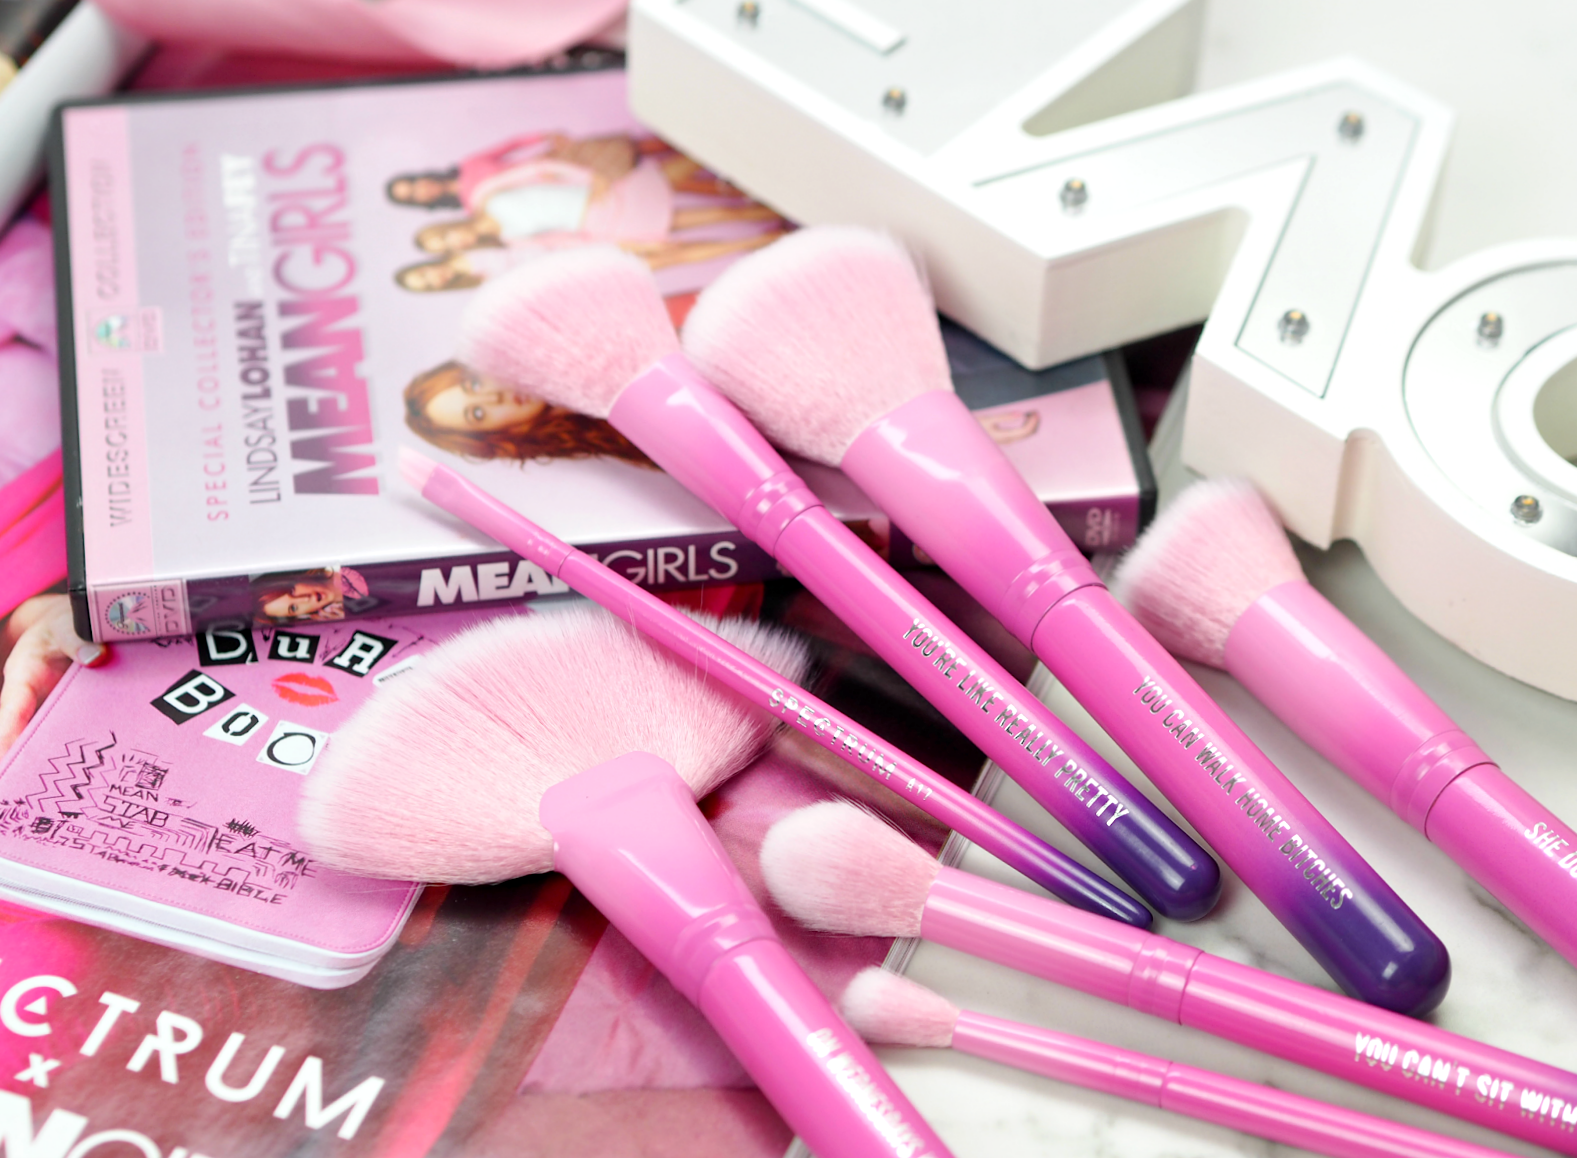 The Mean Girls x Spectrum Brush Collaboration Is The Hottest Launch Of 2017: Get The Lowdown!